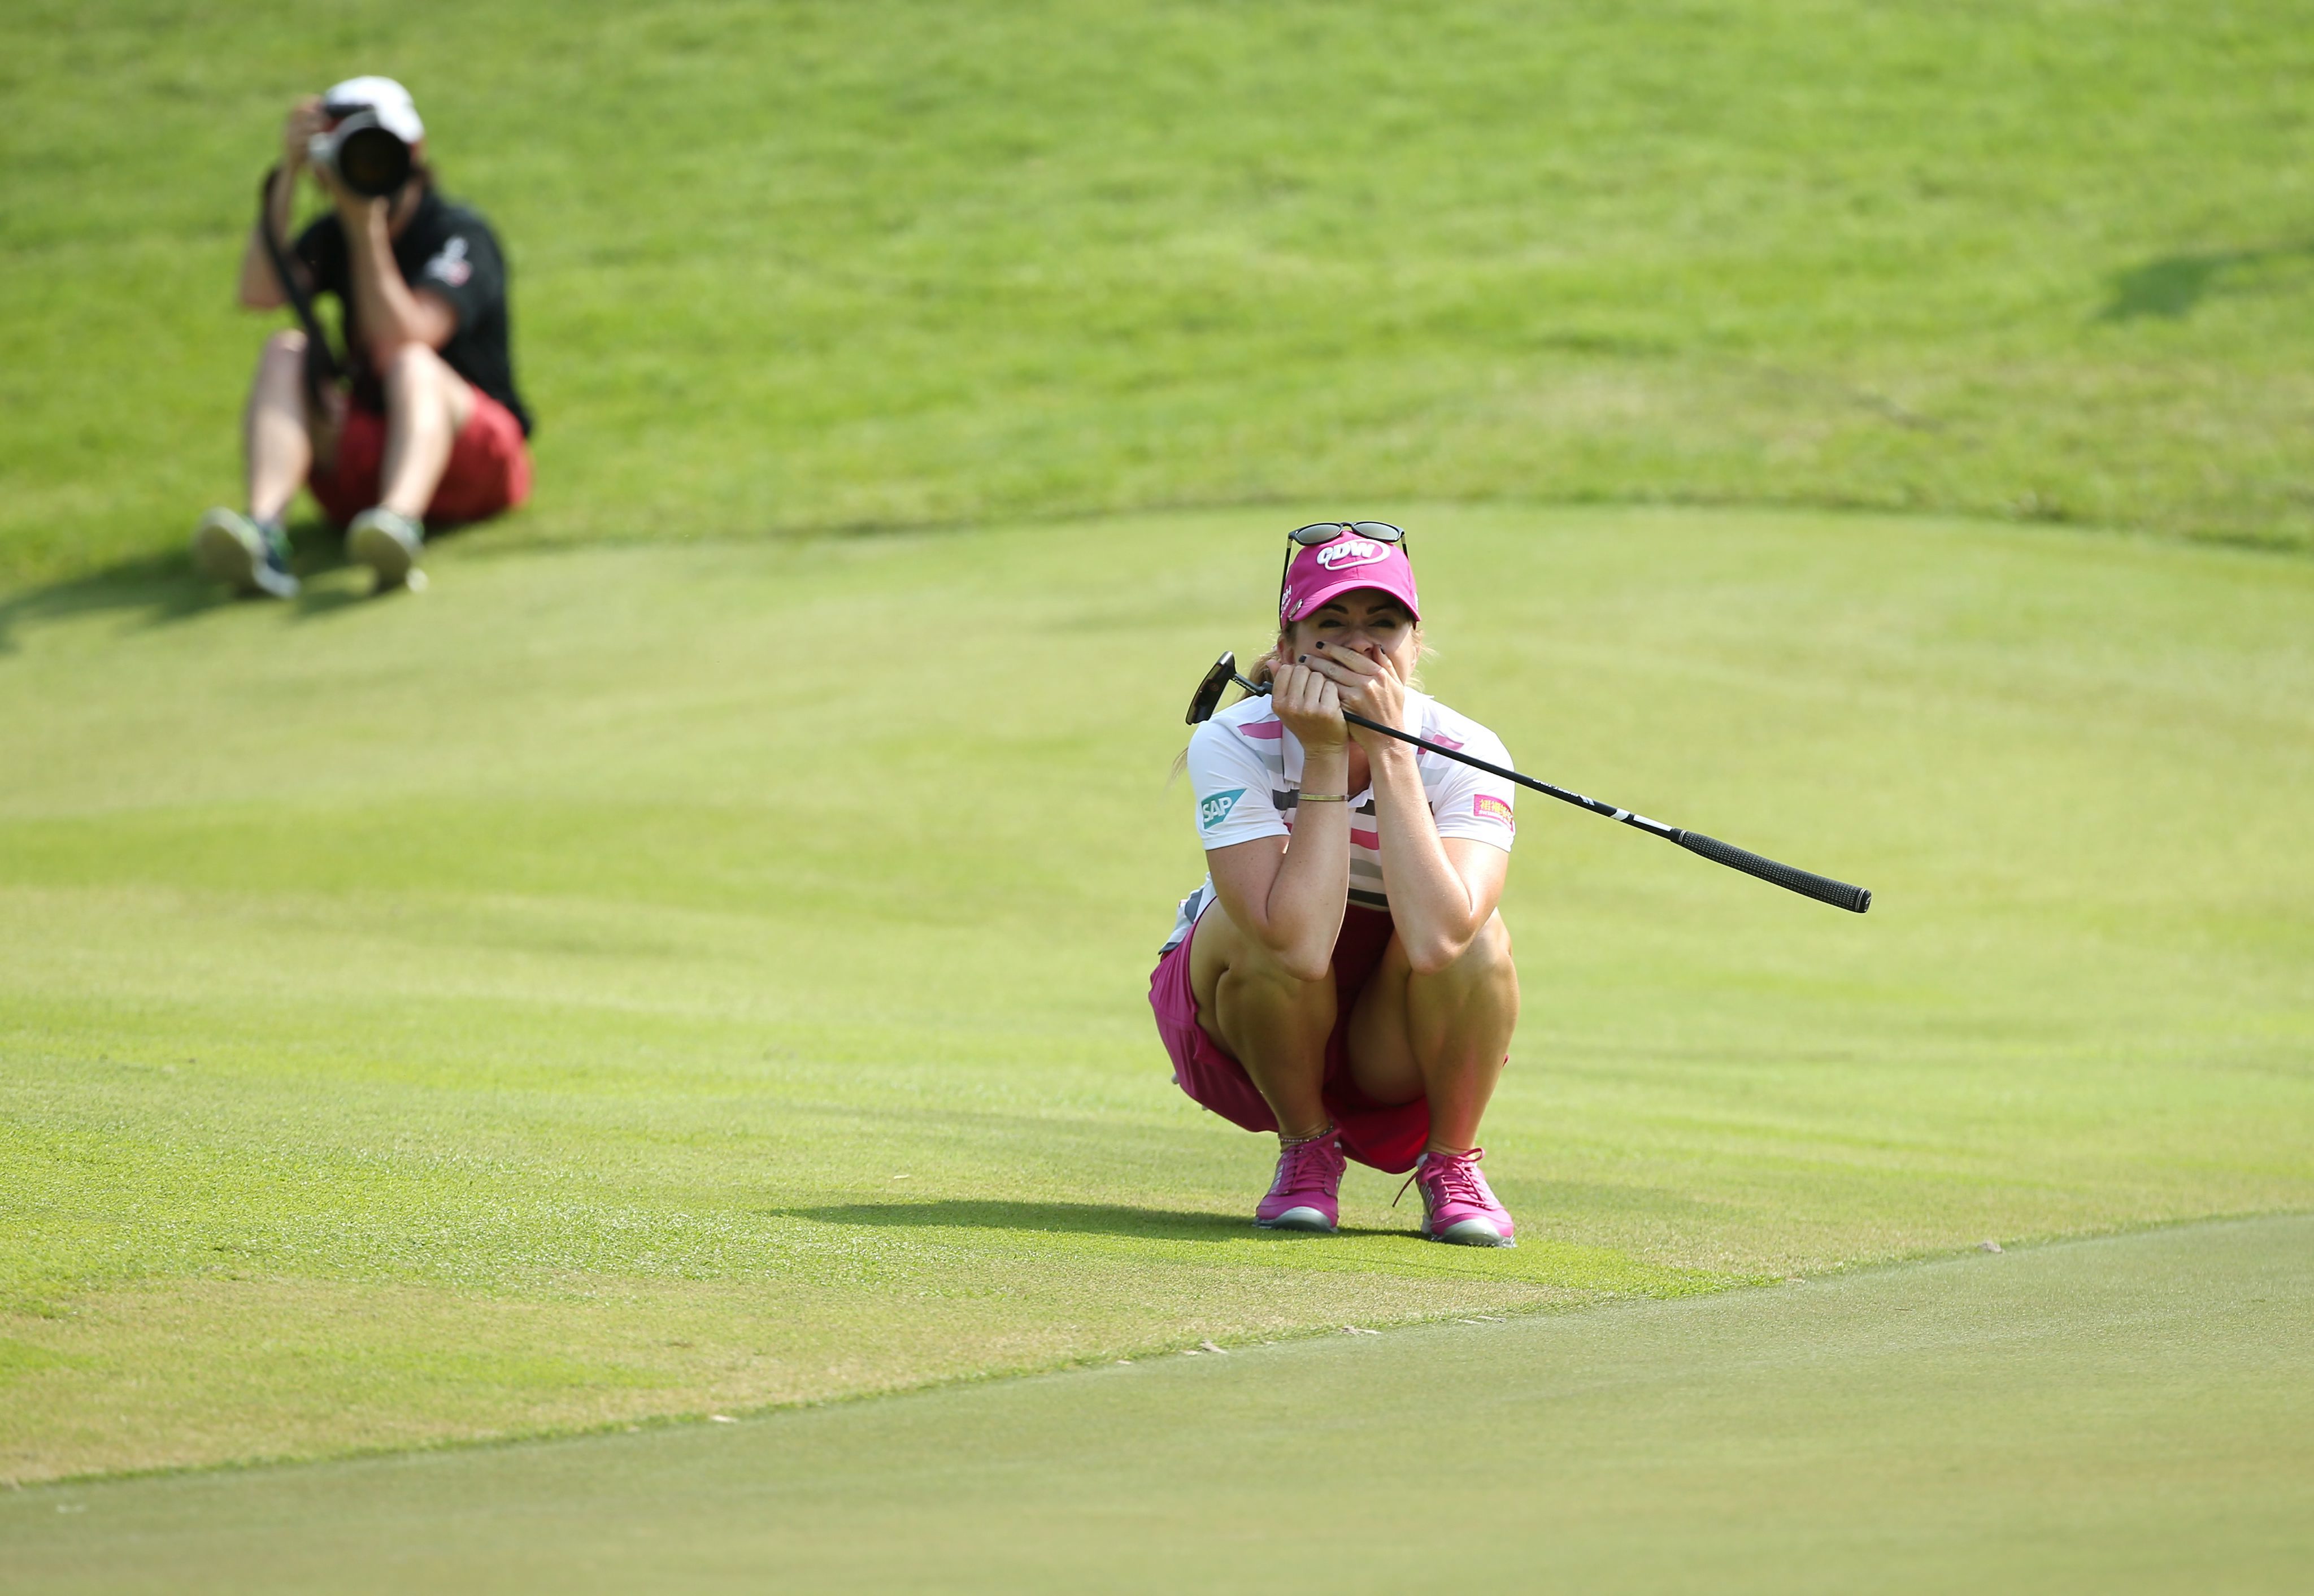 Paula Creamer celebrates after sinking a 75-foot eagle putt to win the HSBC Women's Championships at the Sentosa Golf Club in Singapore. Photo: EPA